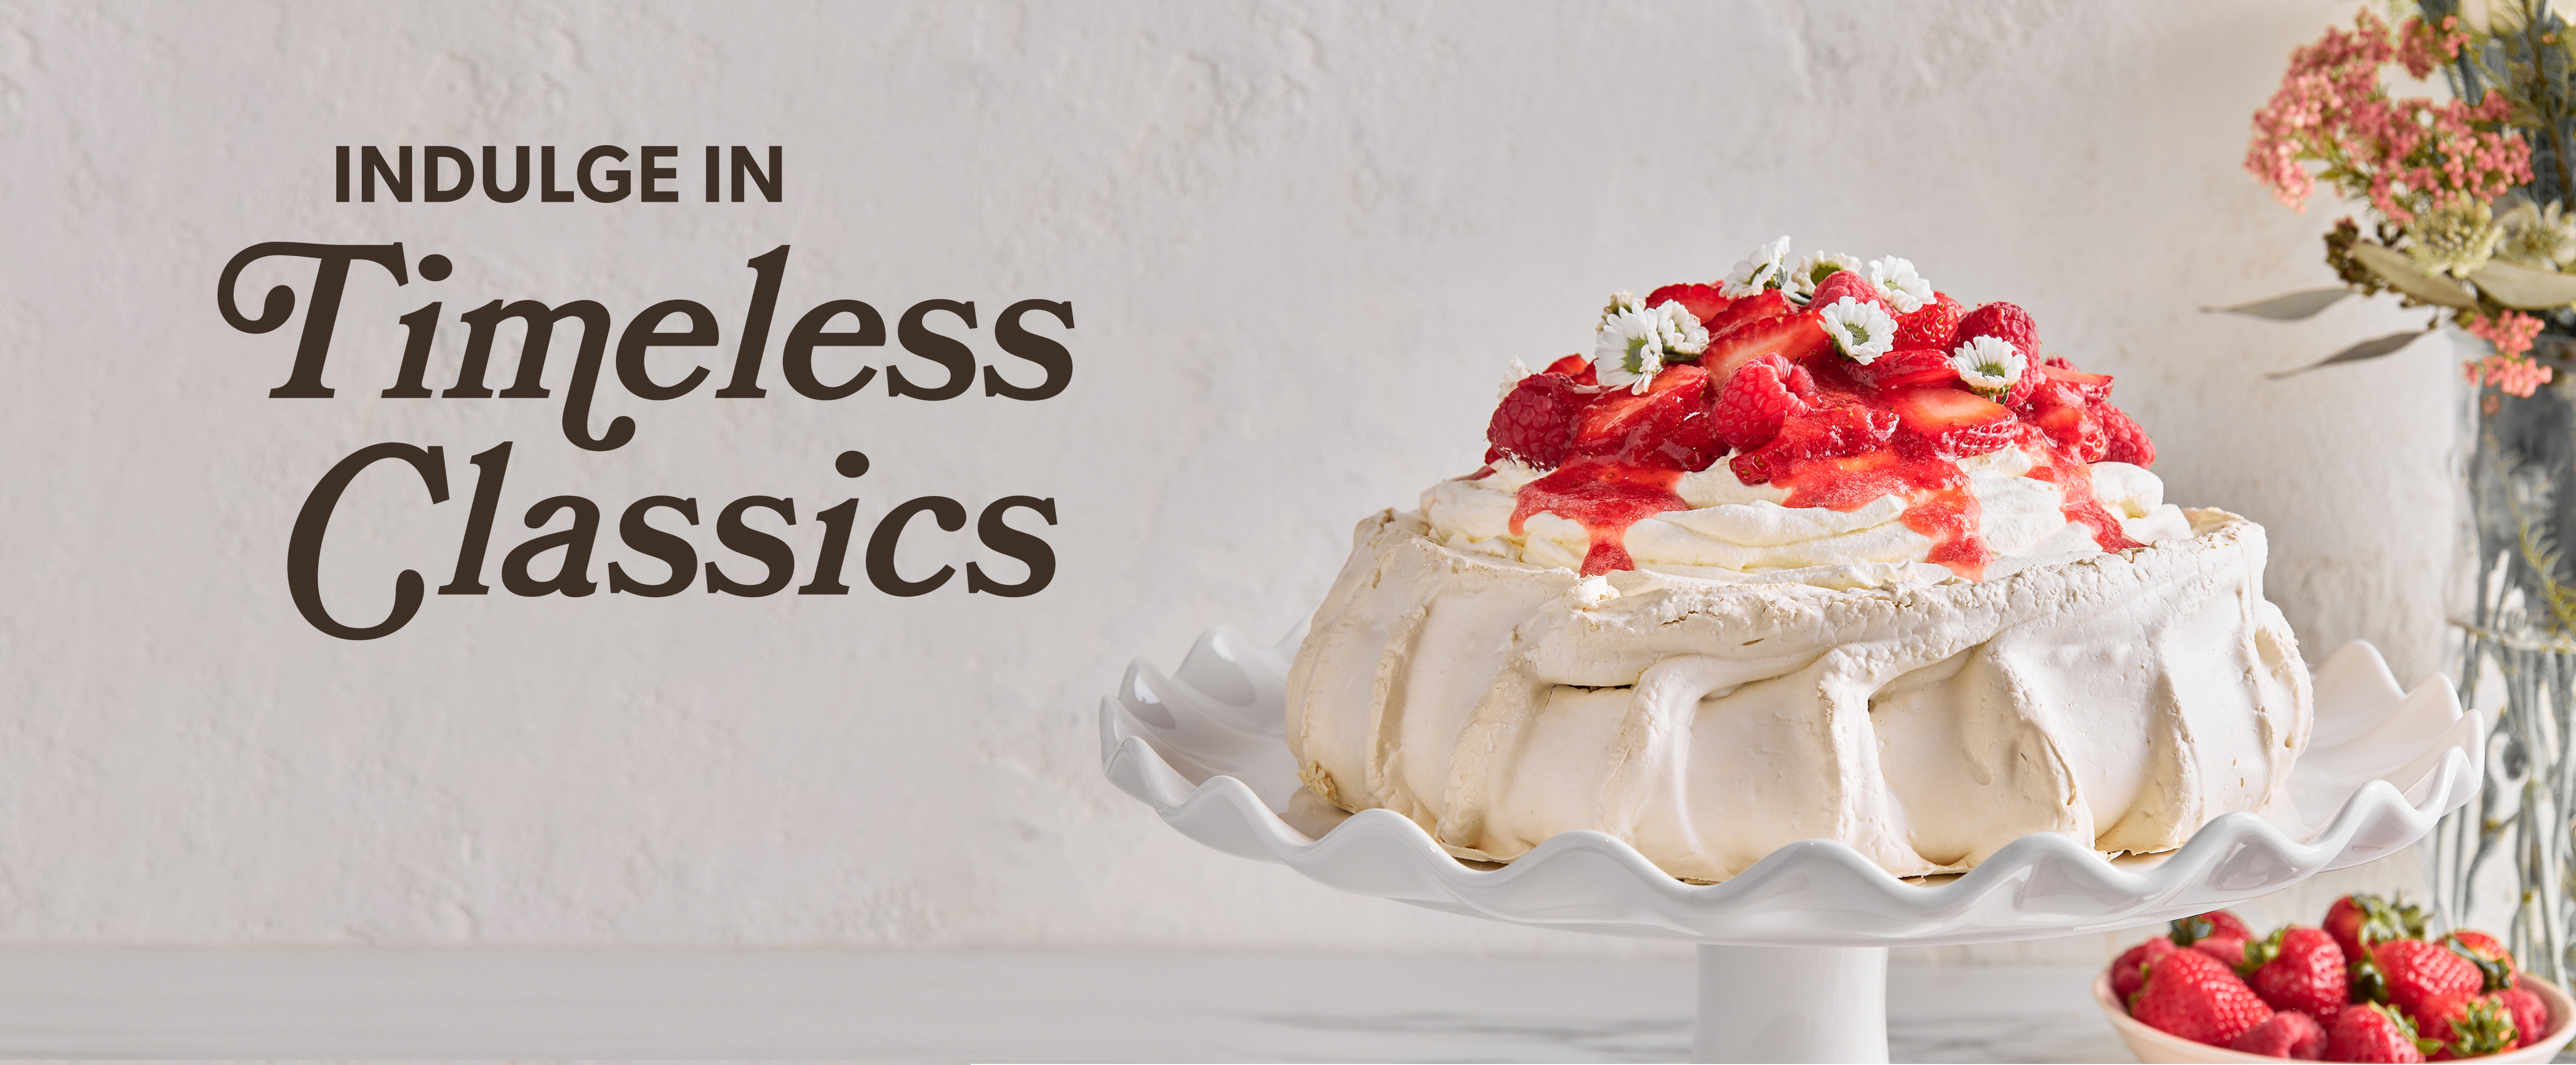 Pavlova with berries with text Indulgence in Timeless Classics